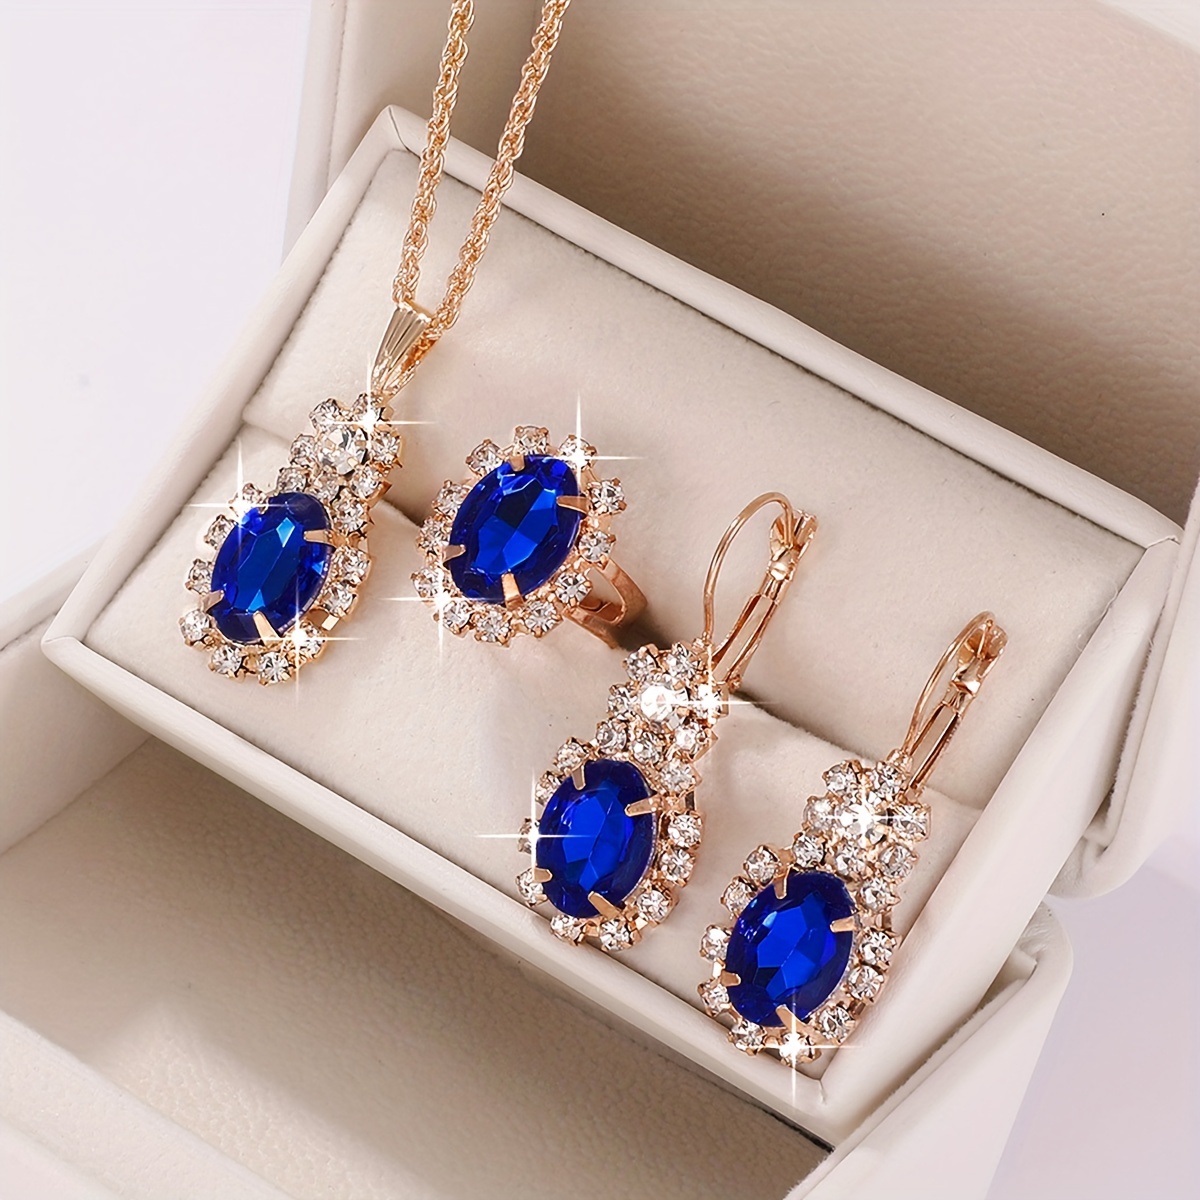 

Luxury Women's Fashion Jewelry Set With Elegant Blue Stones, Gold Plated Necklace, Earrings, And Ring Set, Statement Accessories For Dress-up & Special Occasions